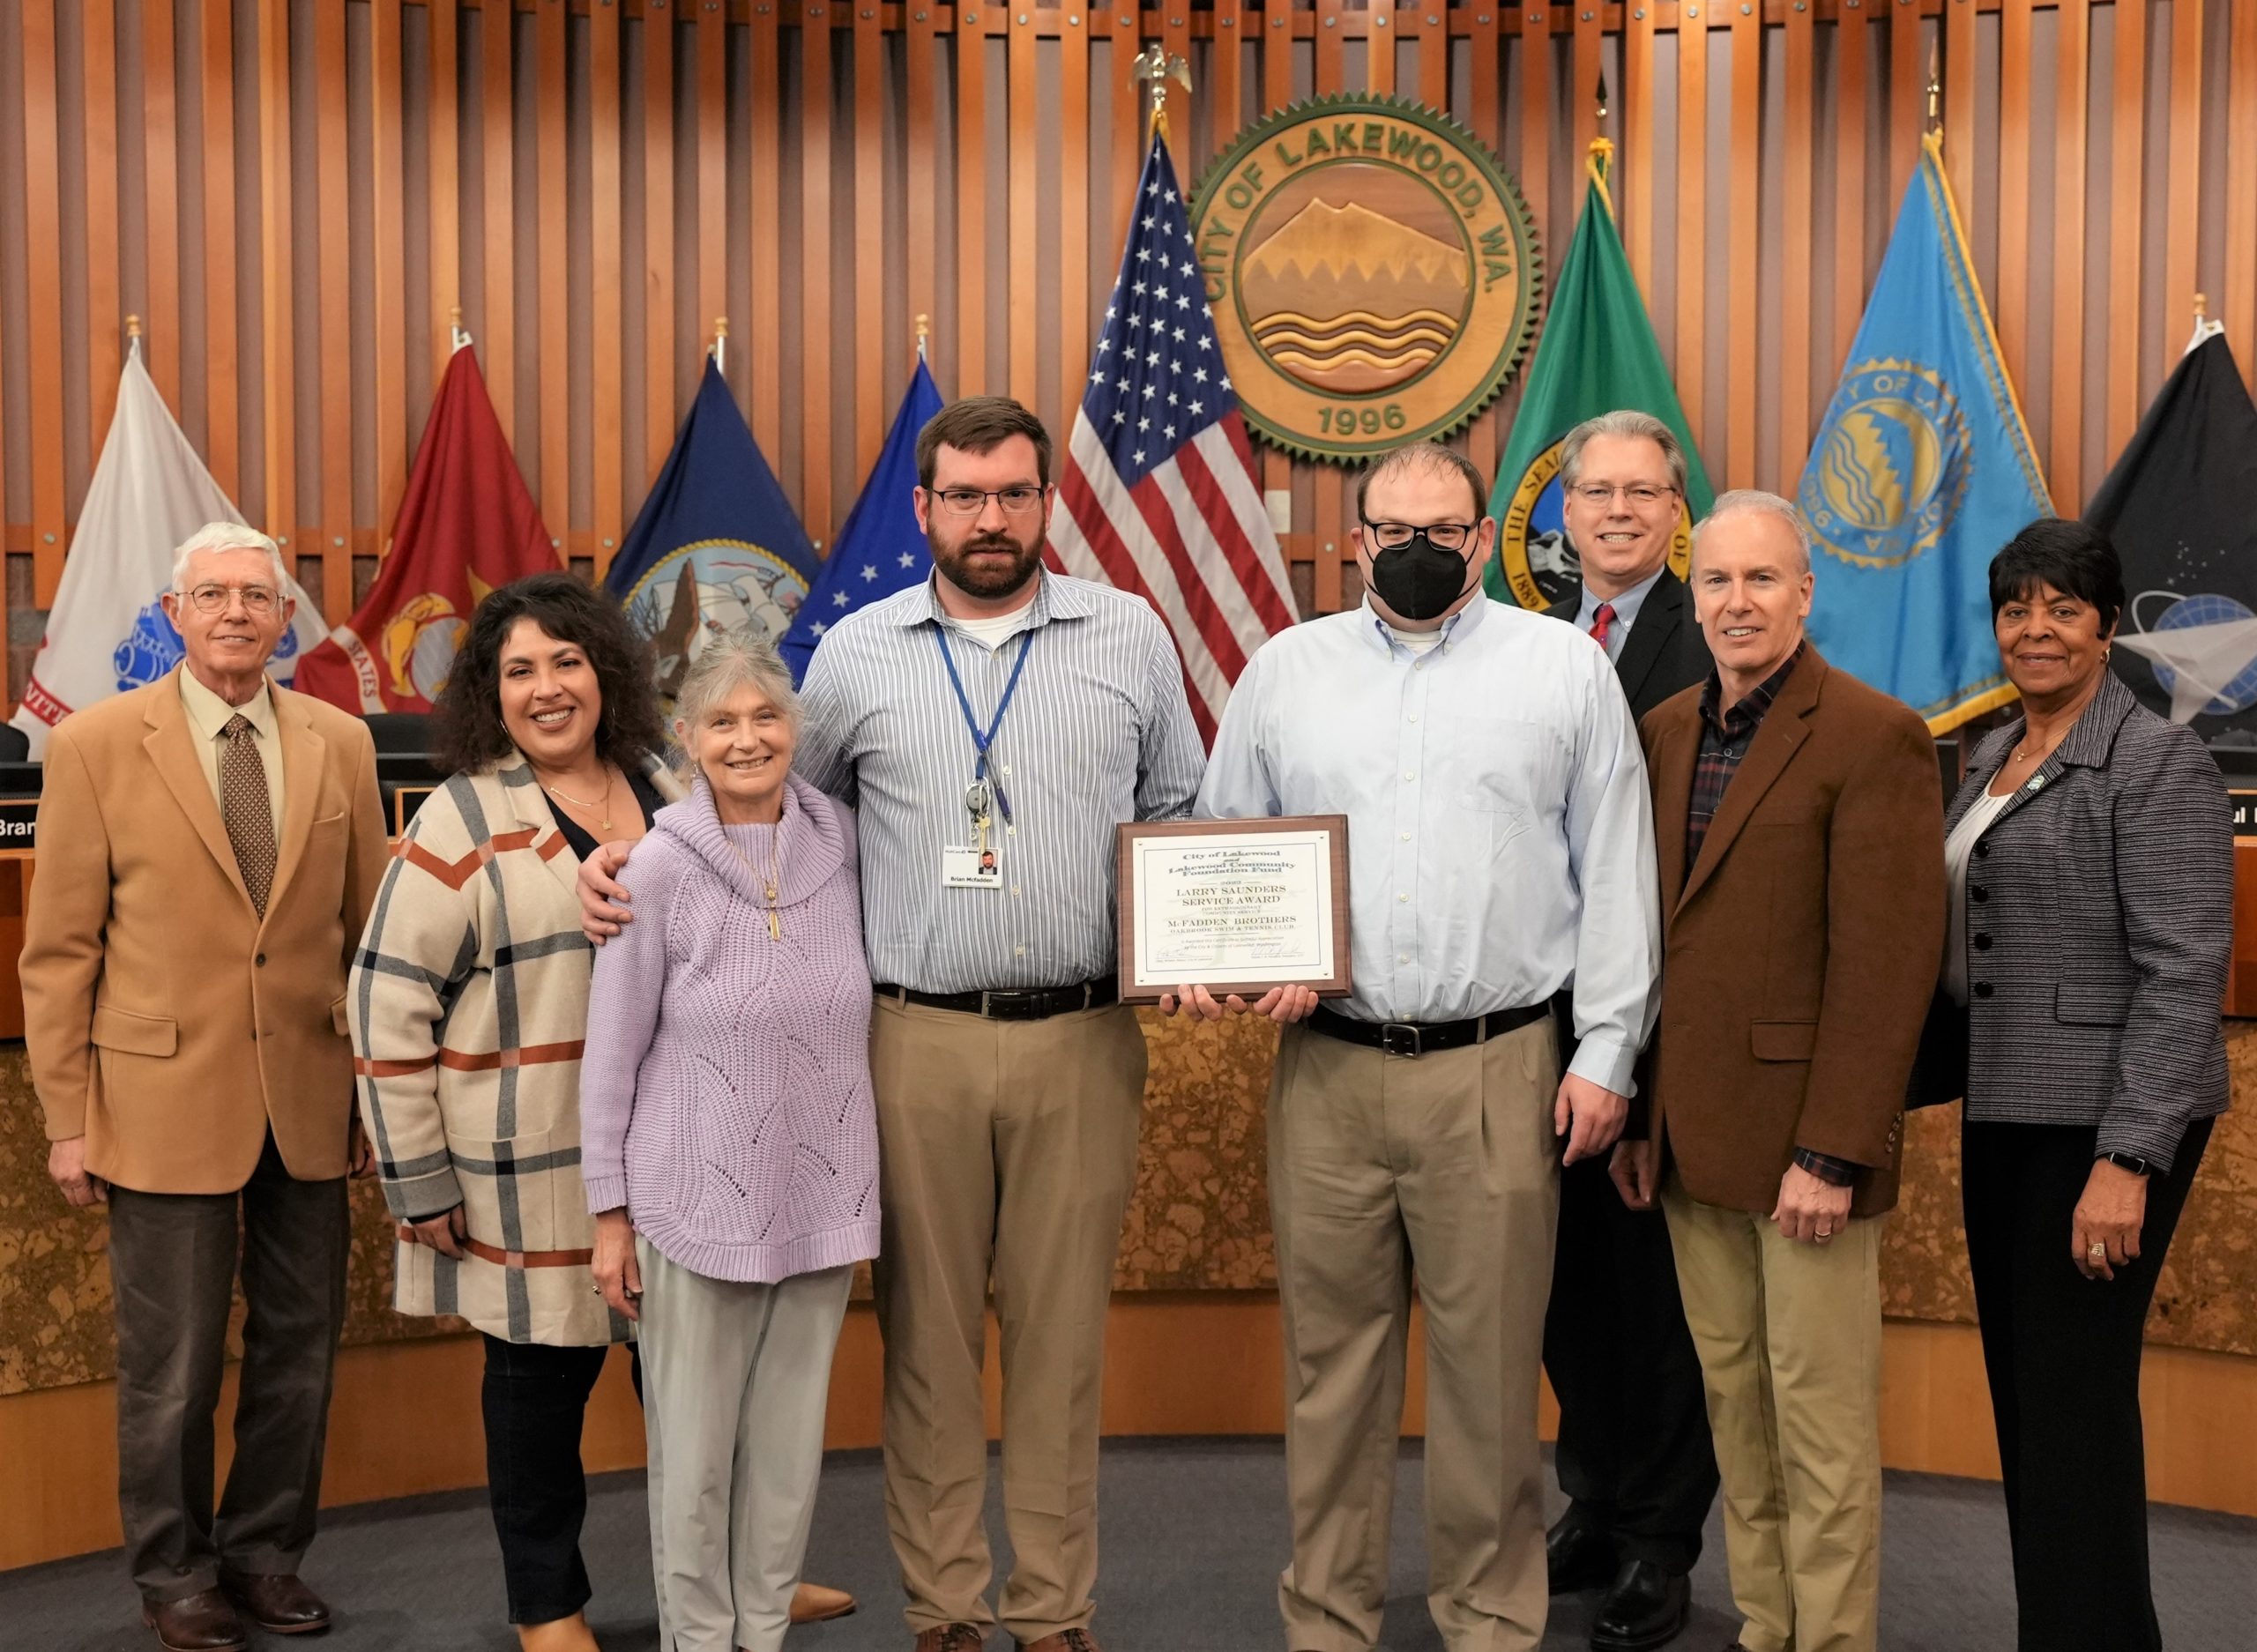 The Larry Saunders Service Award for 2022 was presented to the McFadden brothers who pose in this photo with the Lakewood City Council and Sally Saunders, wife of the late Larry Saunders.